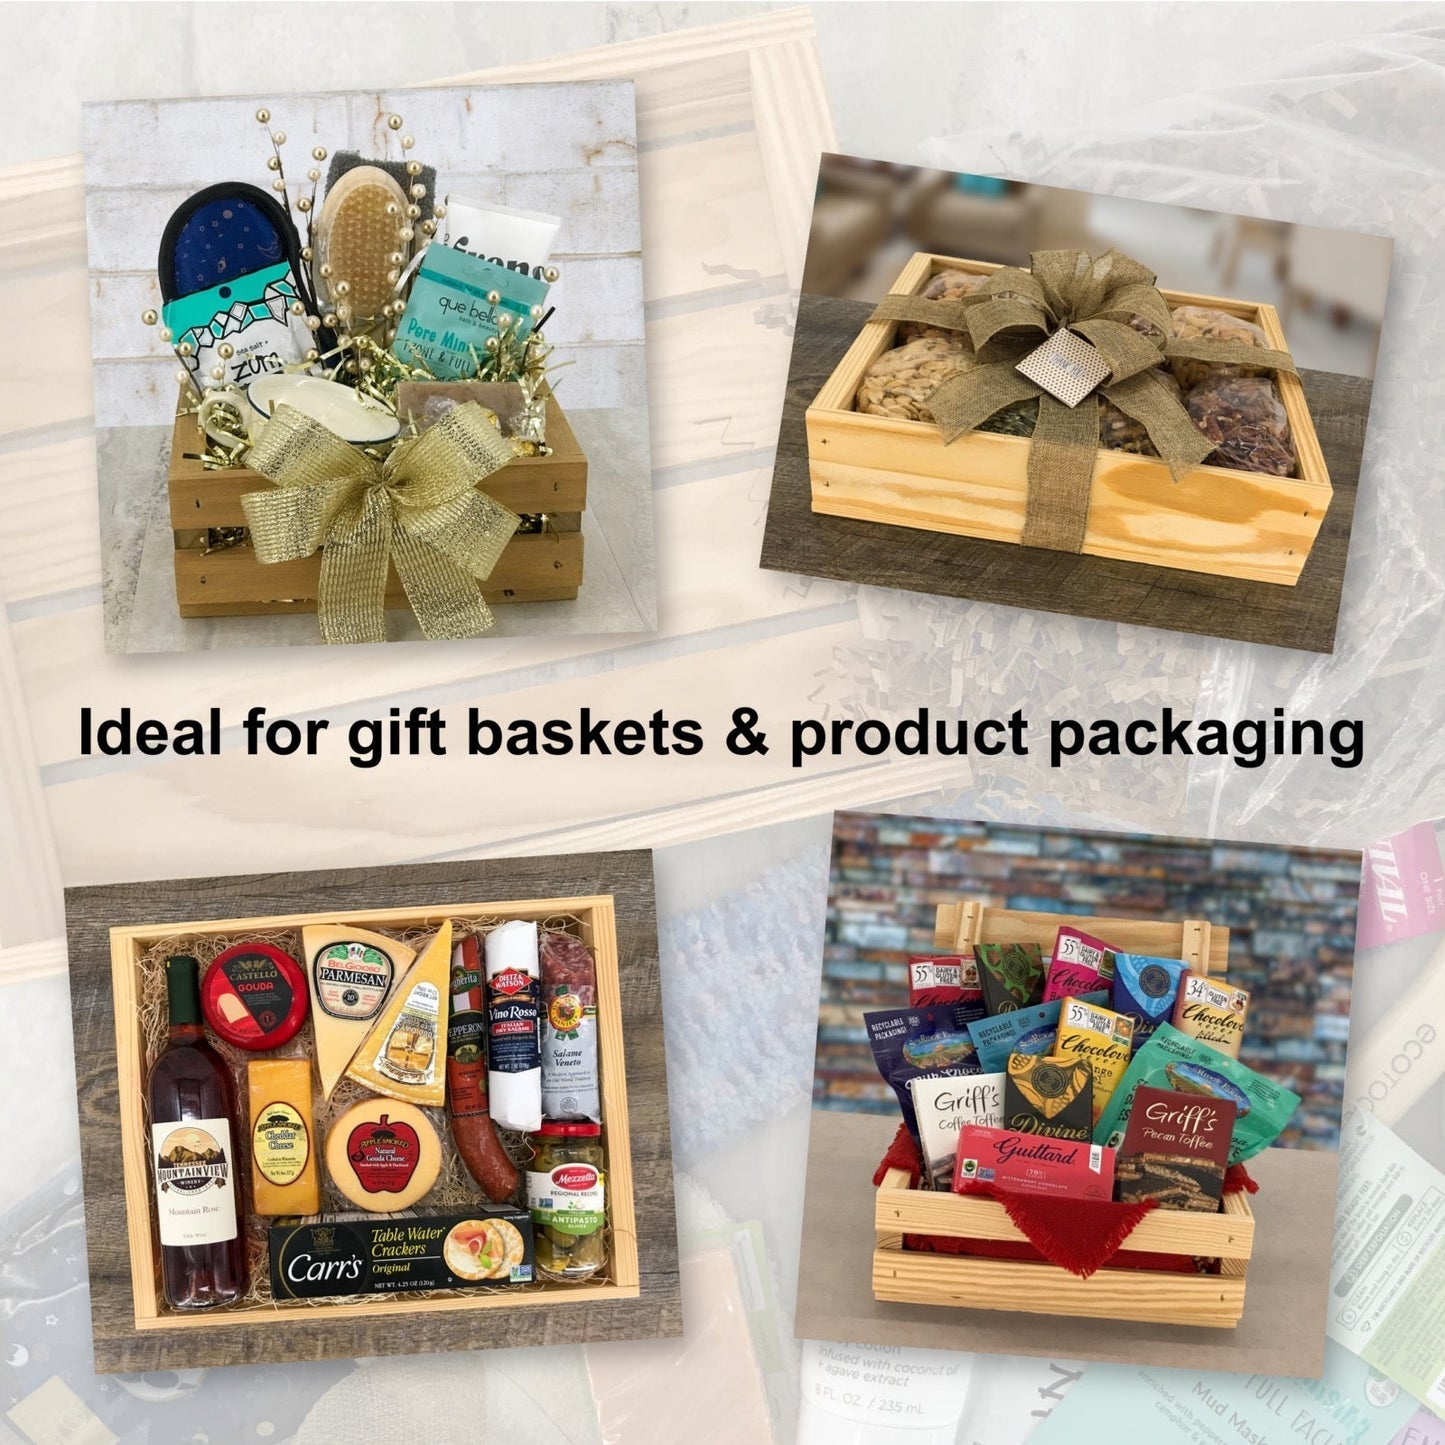 Ideal for gift baskets and product packaging, B2-10.375-7.875-4.3125-NX-NW-NL, 6-B2-10.375-7.875-4.3125-NX-NW-NL, 12-B2-10.375-7.875-4.3125-NX-NW-NL, 24-B2-10.375-7.875-4.3125-NX-NW-NL, 48-B2-10.375-7.875-4.3125-NX-NW-NL, 96-B2-10.375-7.875-4.3125-NX-NW-NL